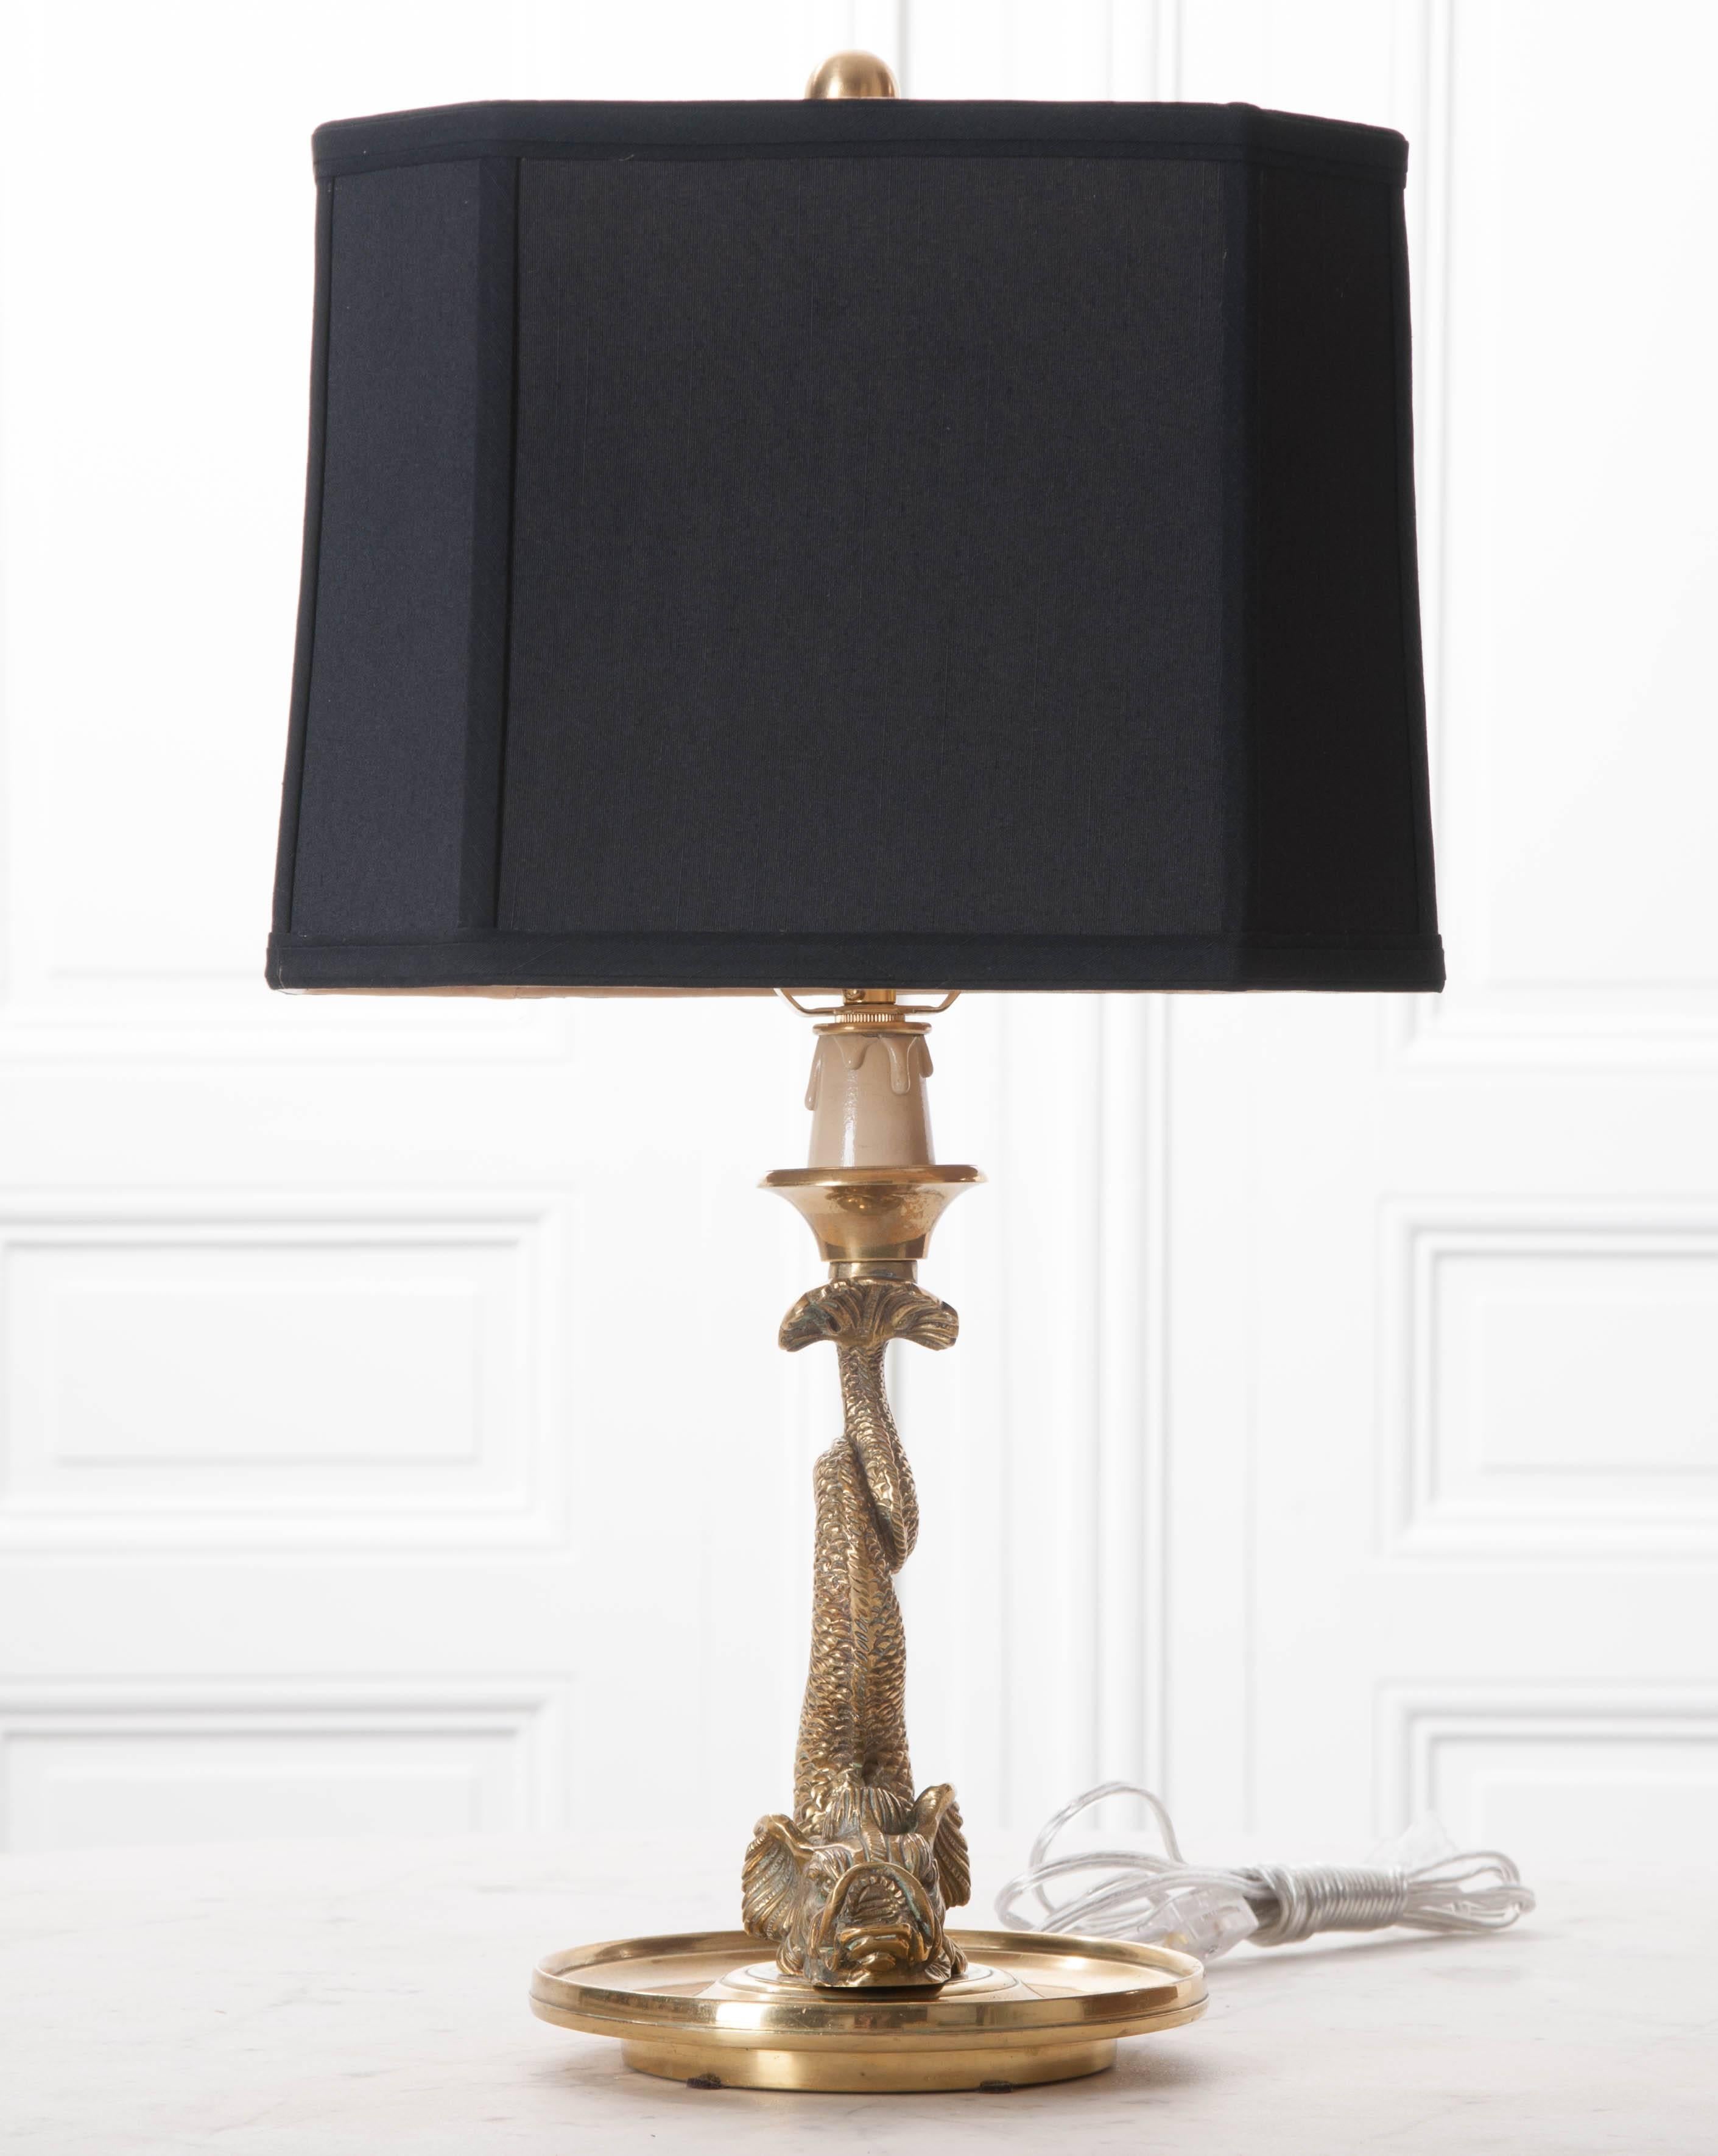 A gorgeous French brass lamp, done in a dolphin motif, with black silk shade. The fish’s head is near the base of the lamp, which has a dish-shaped form, ideal for catching spare change and other loose ends. The sinuous fish loops its scaly body,